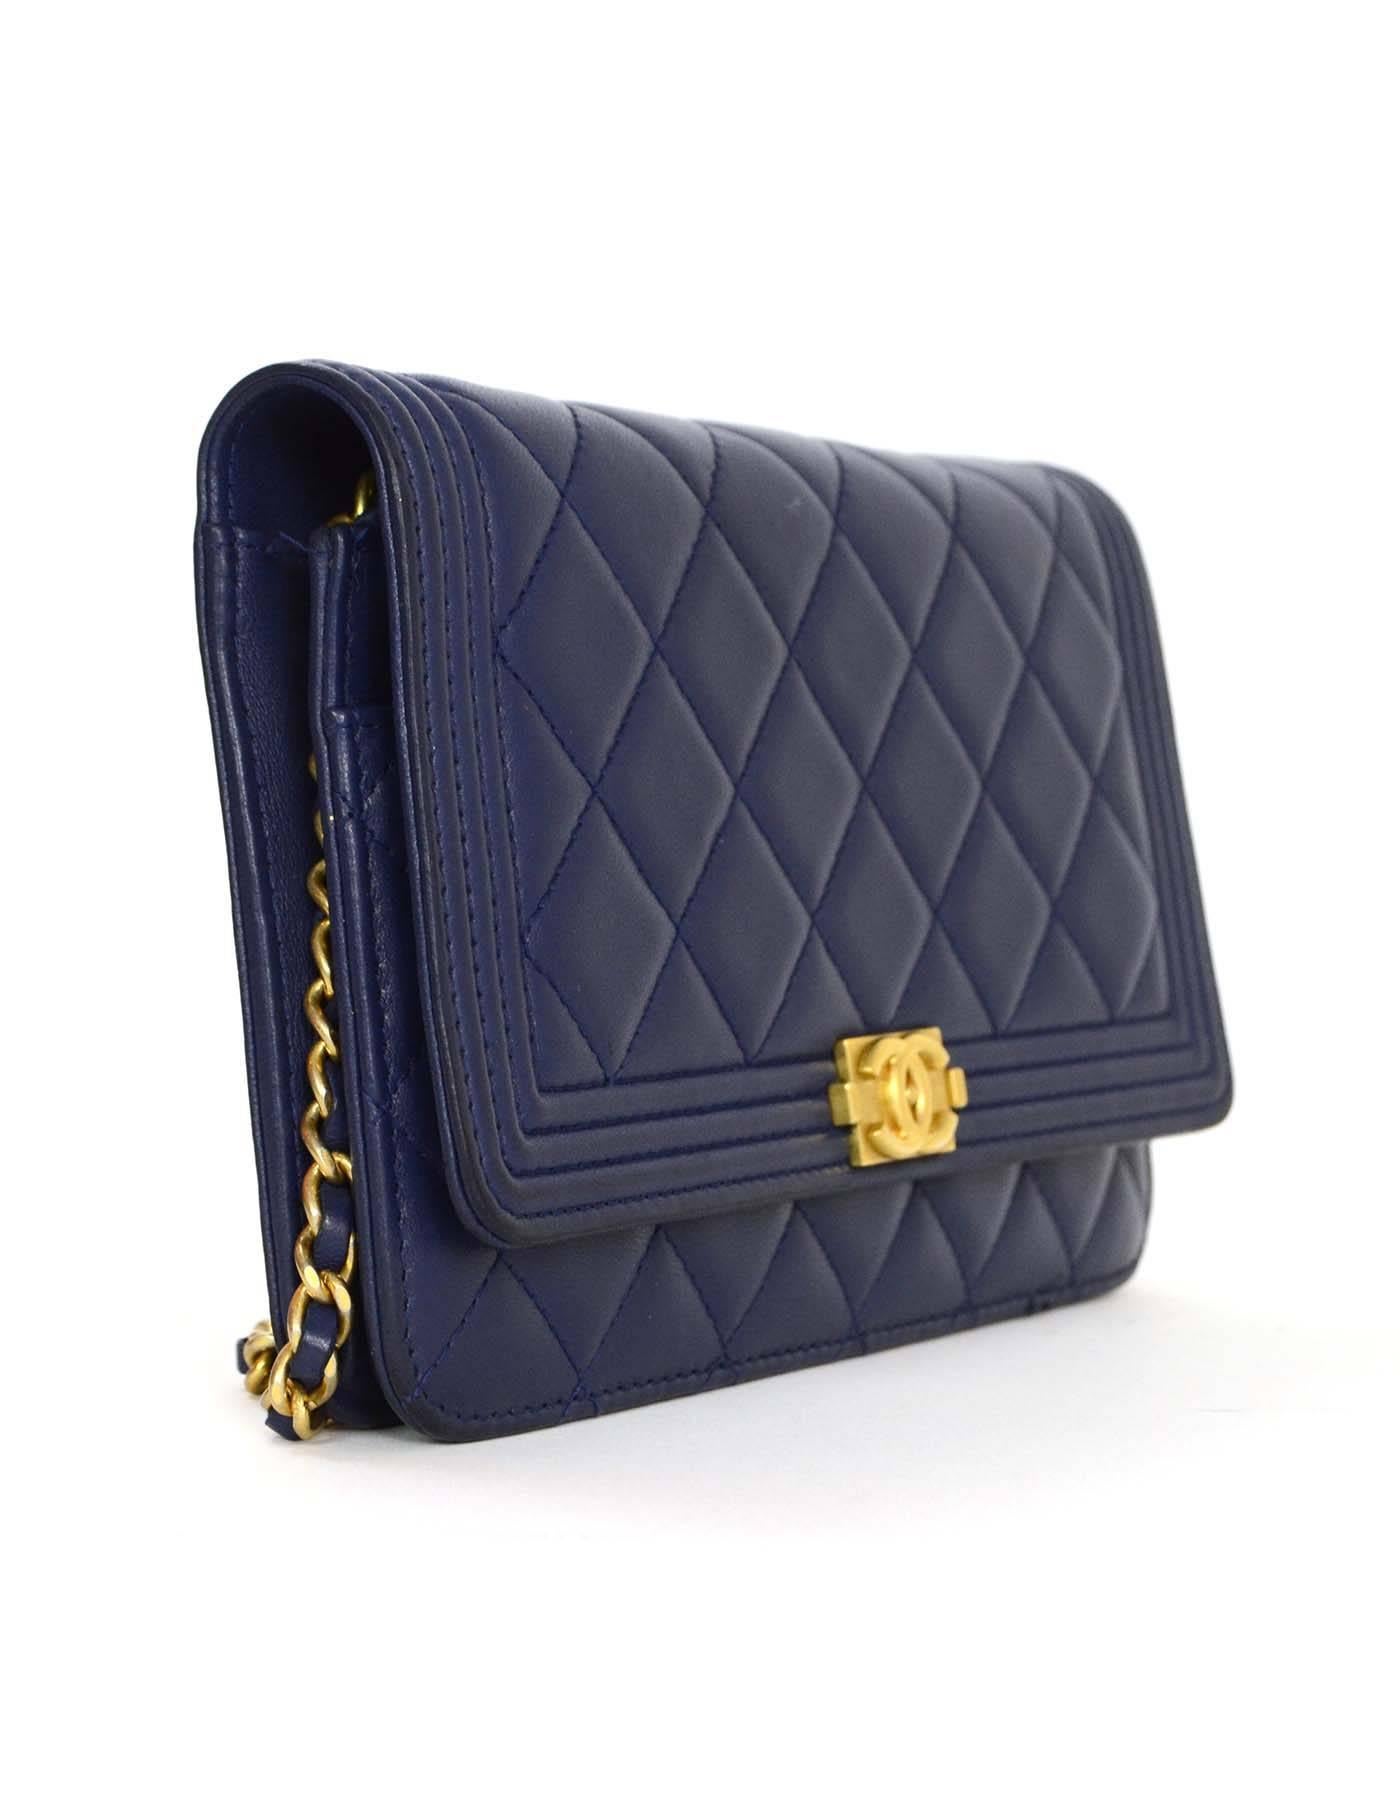 Chanel Navy Lambskin Boy WOC Bag 
Made In: Italy
Year of Production: 2015
Color: Navy
Hardware: Goldtone
Materials: Lambskin
Lining: Navy leather and grosgrain
Closure/Opening: Flap top with snap closure
Exteror Pockets: None
Interior